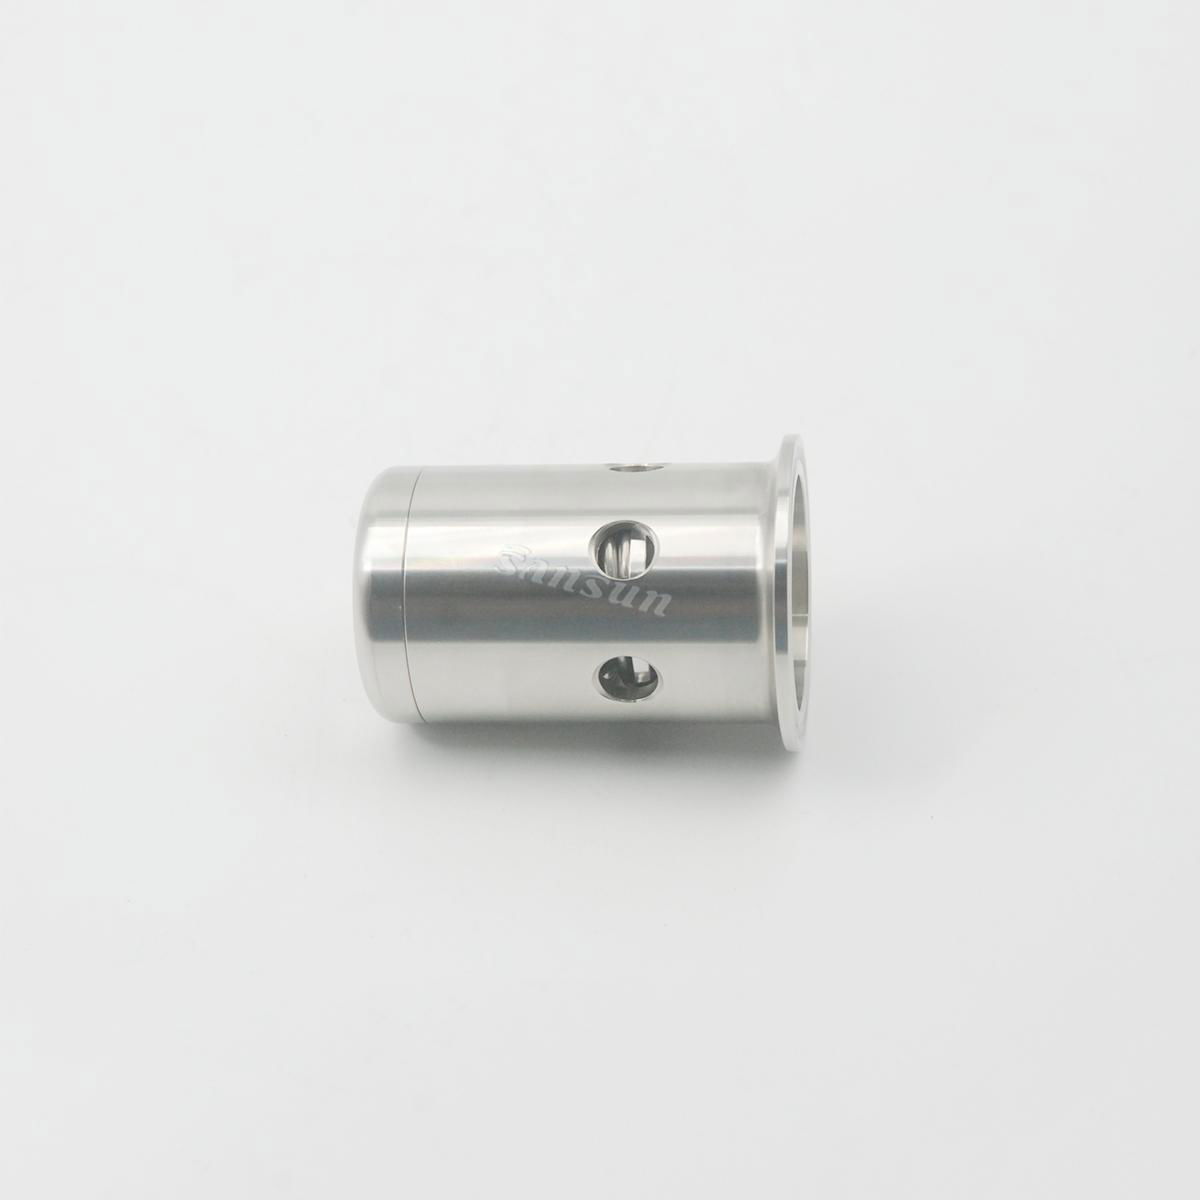 Sanitary safety relief valve stainless steel air release Valve